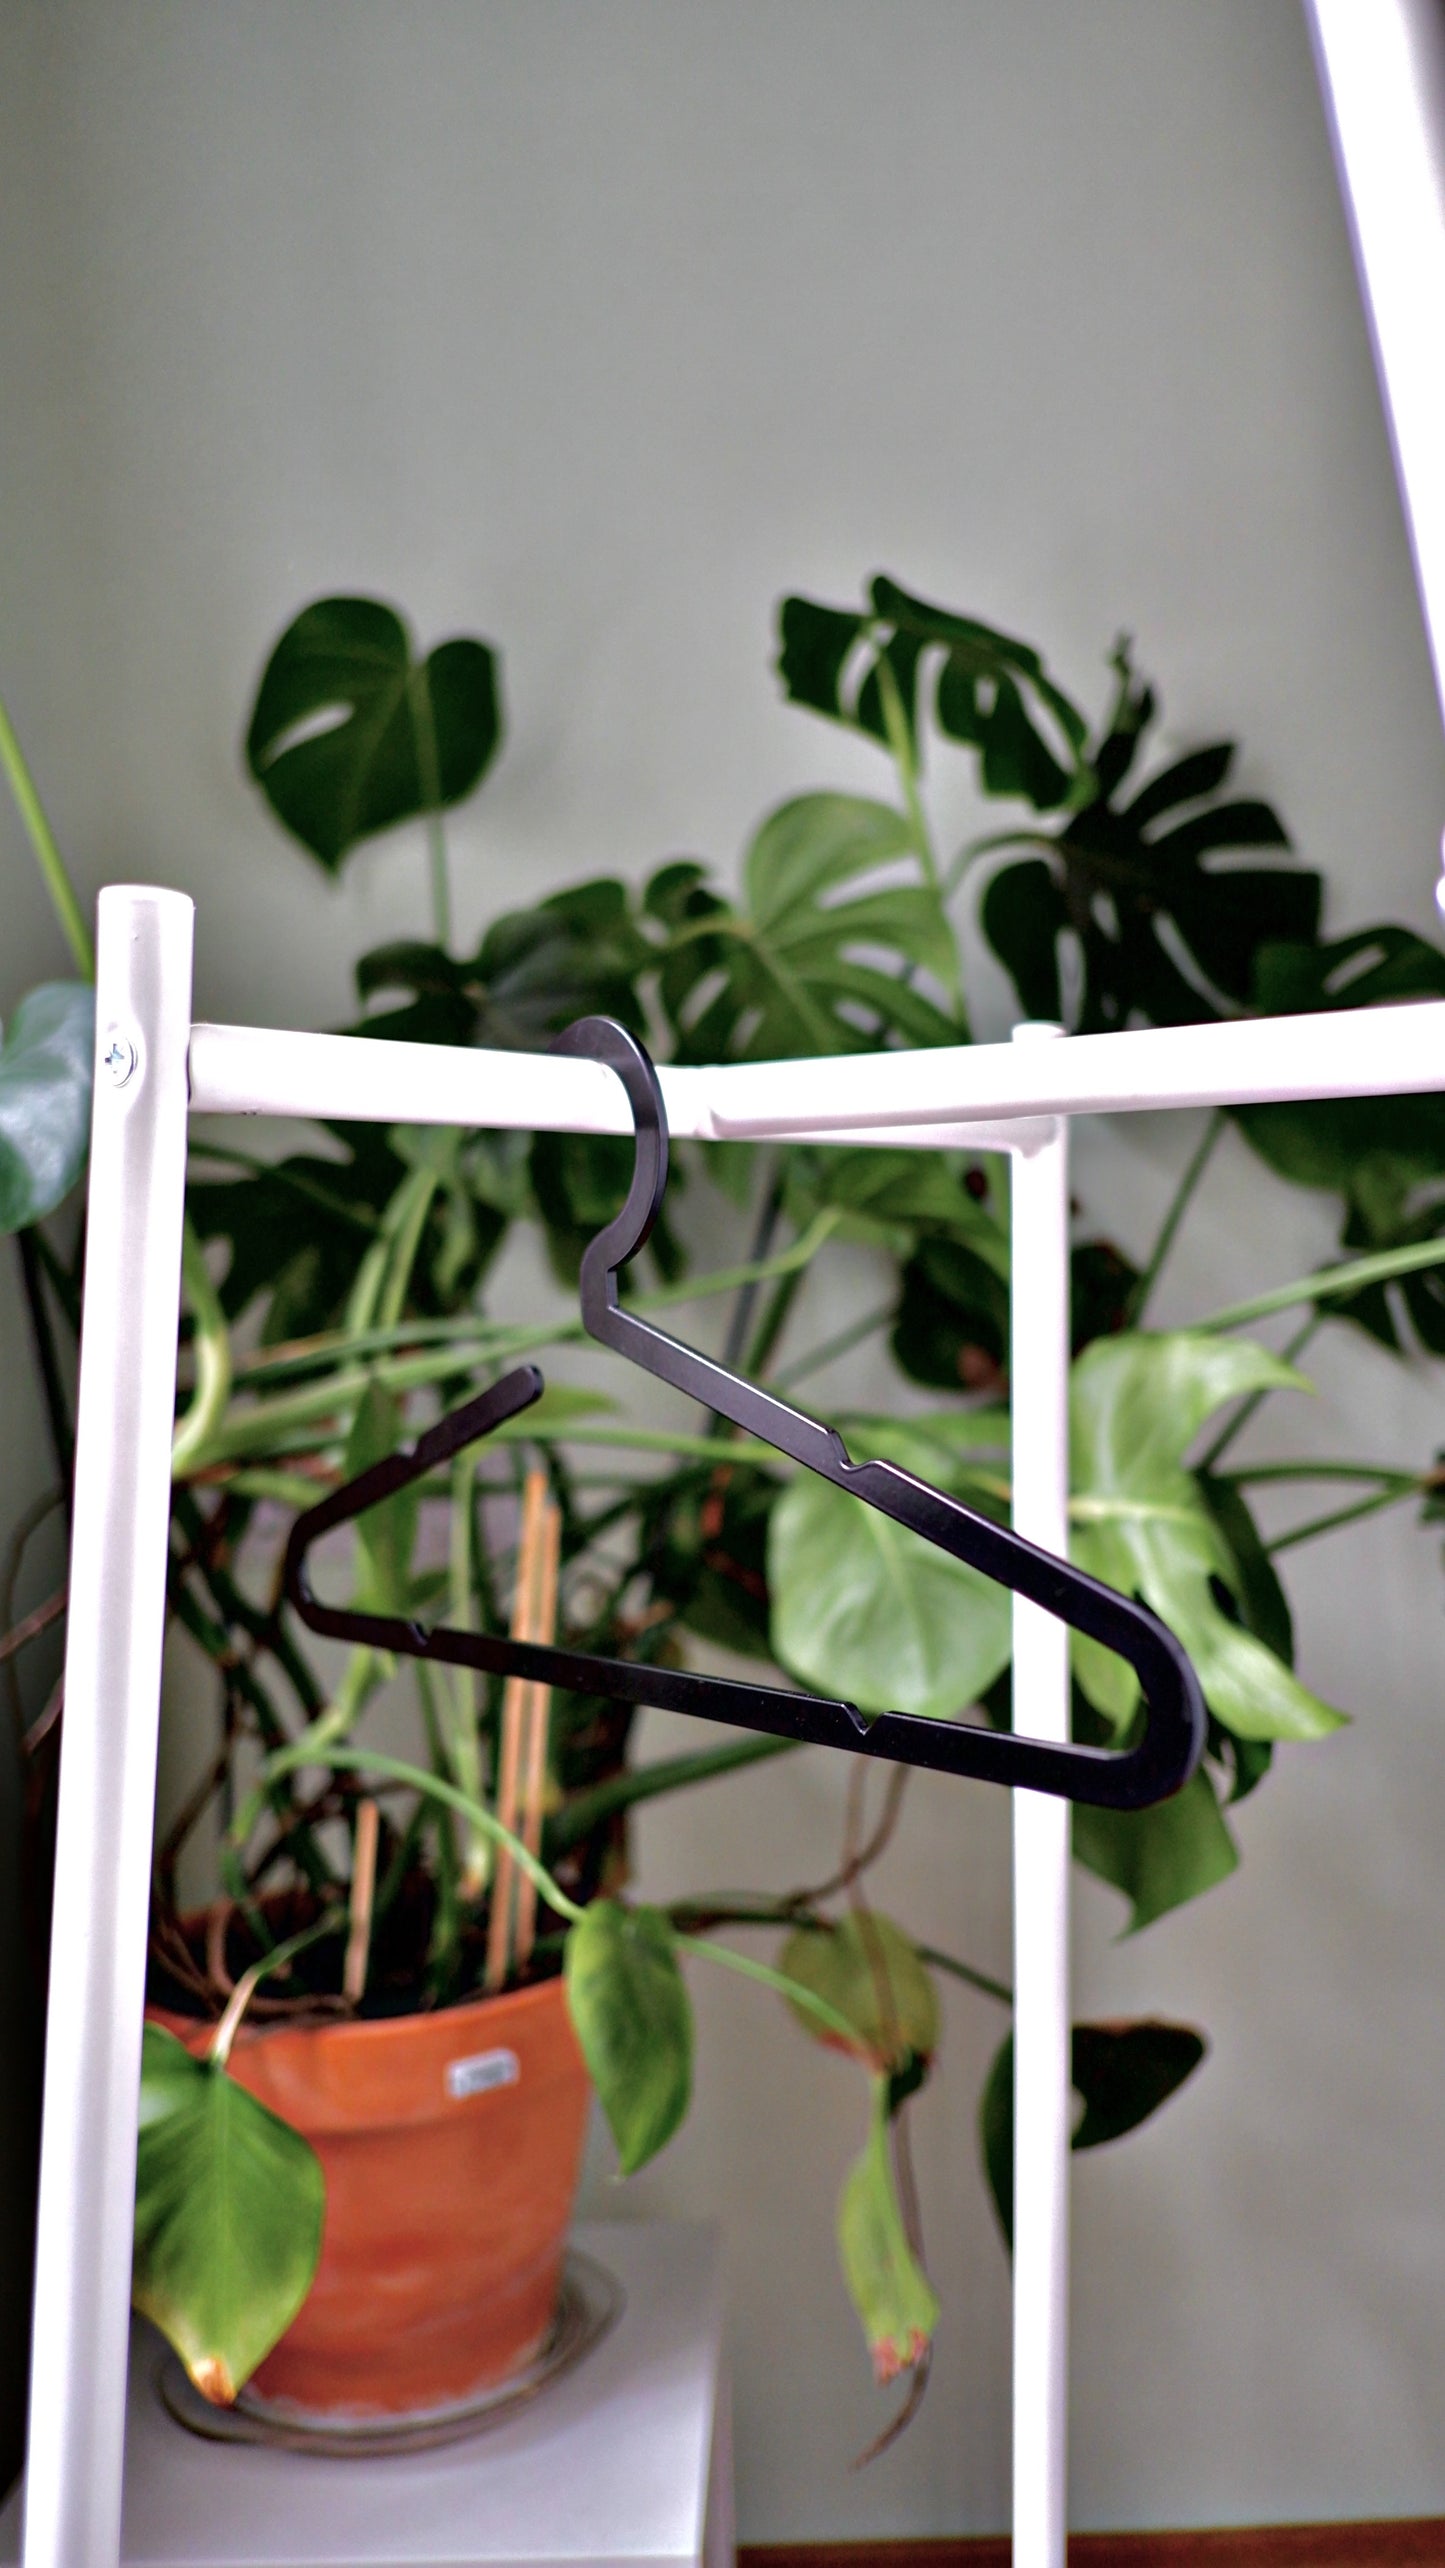 Modern Metal Coat Hangers for Sustainable Living | Durable, Handcrafted Design